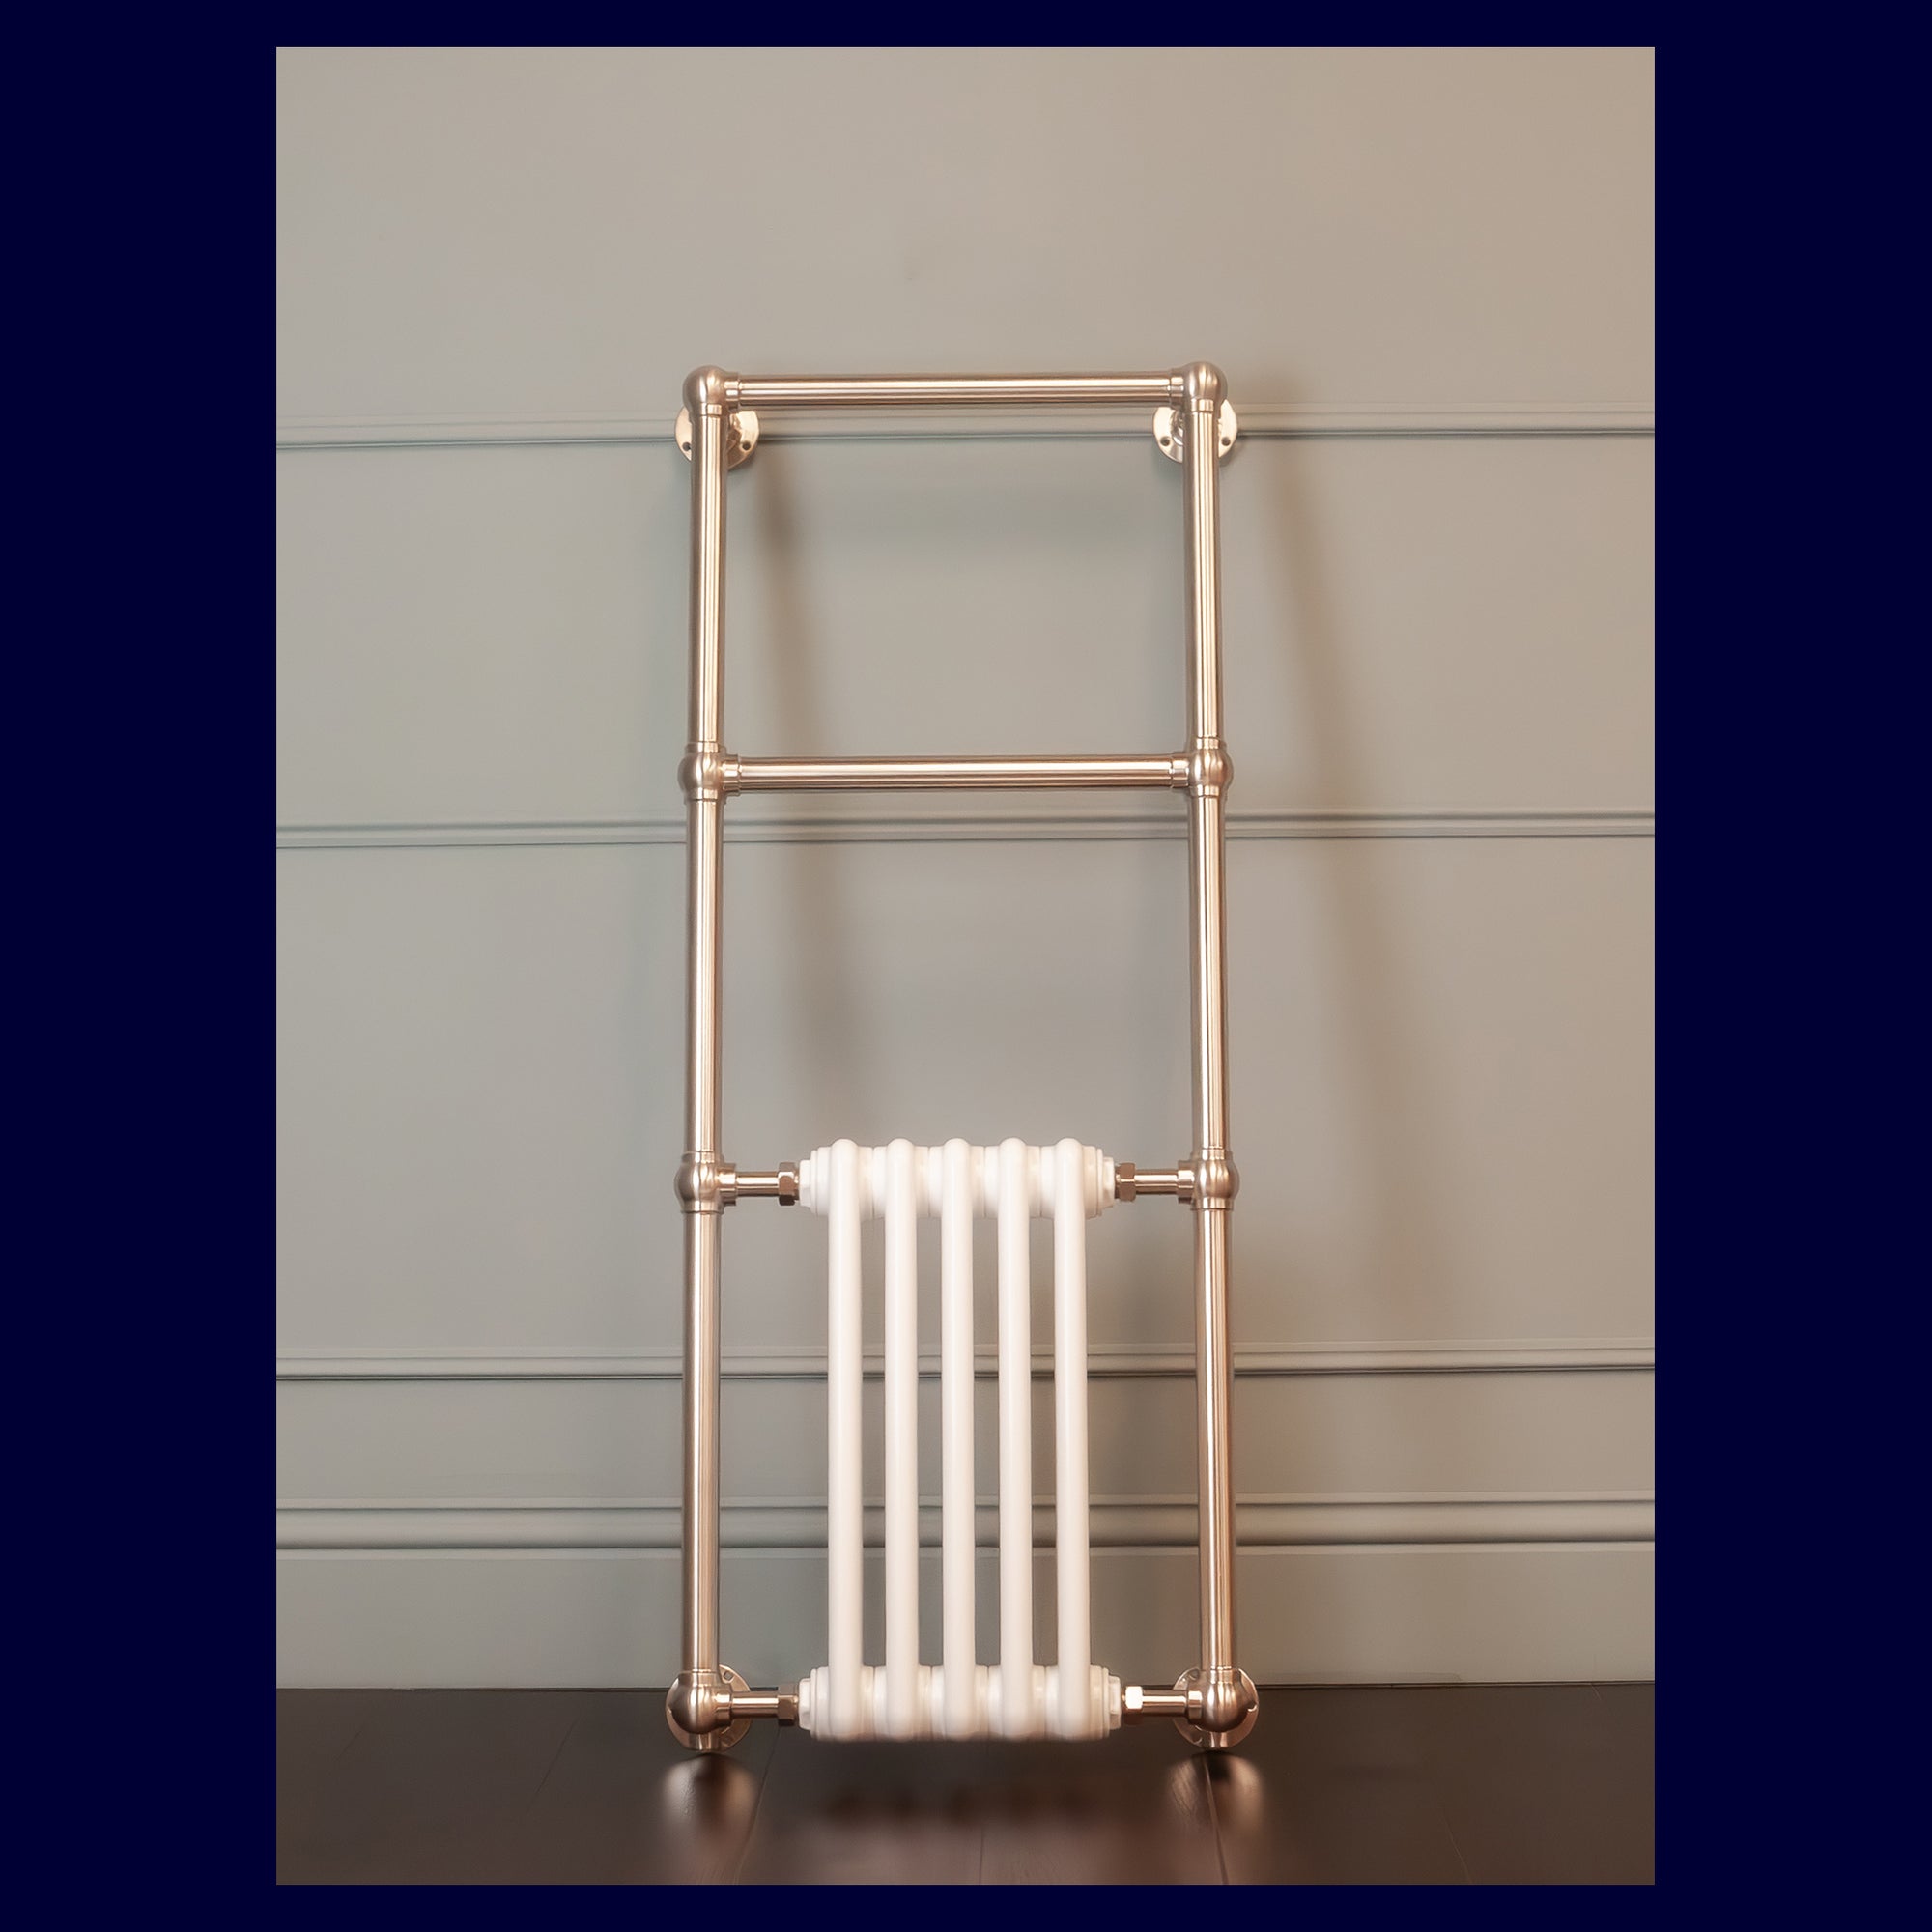 Ex-Display Parker Heated Towel Rail - 1200 x 500 - Central Heating Only - Brushed (Satin) Nickel - Rutland London